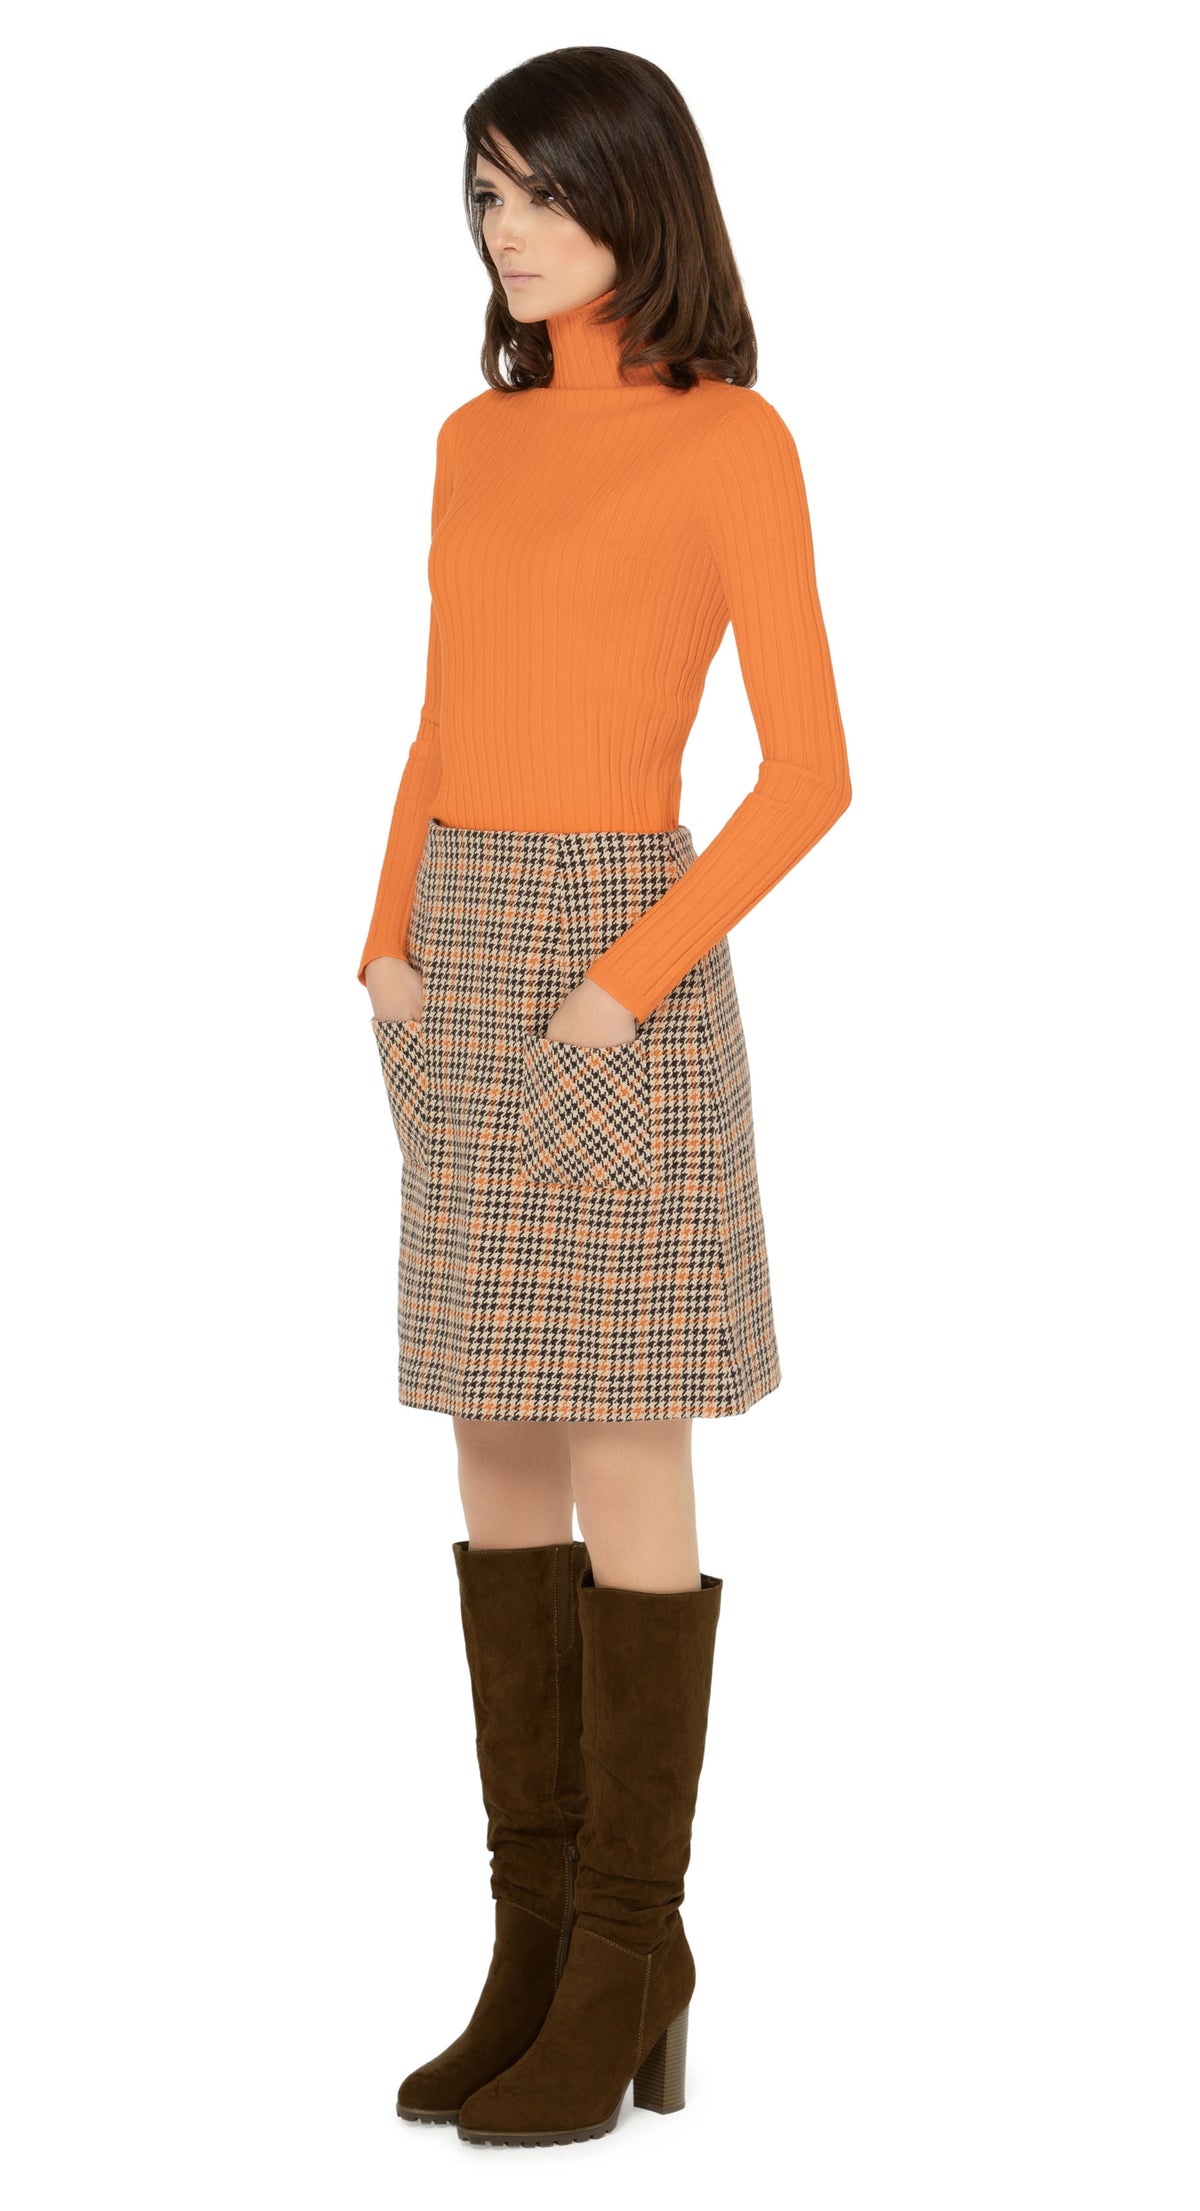 Limited edition, classic fitted, medium weight Italian dogtooth, waist hugging skirt. Warm tones in the weave encourage versatility when dressing up with heels or down with flats or kicks. Worn here with a turtleneck which is sold separately. Please inquire to shop the look.